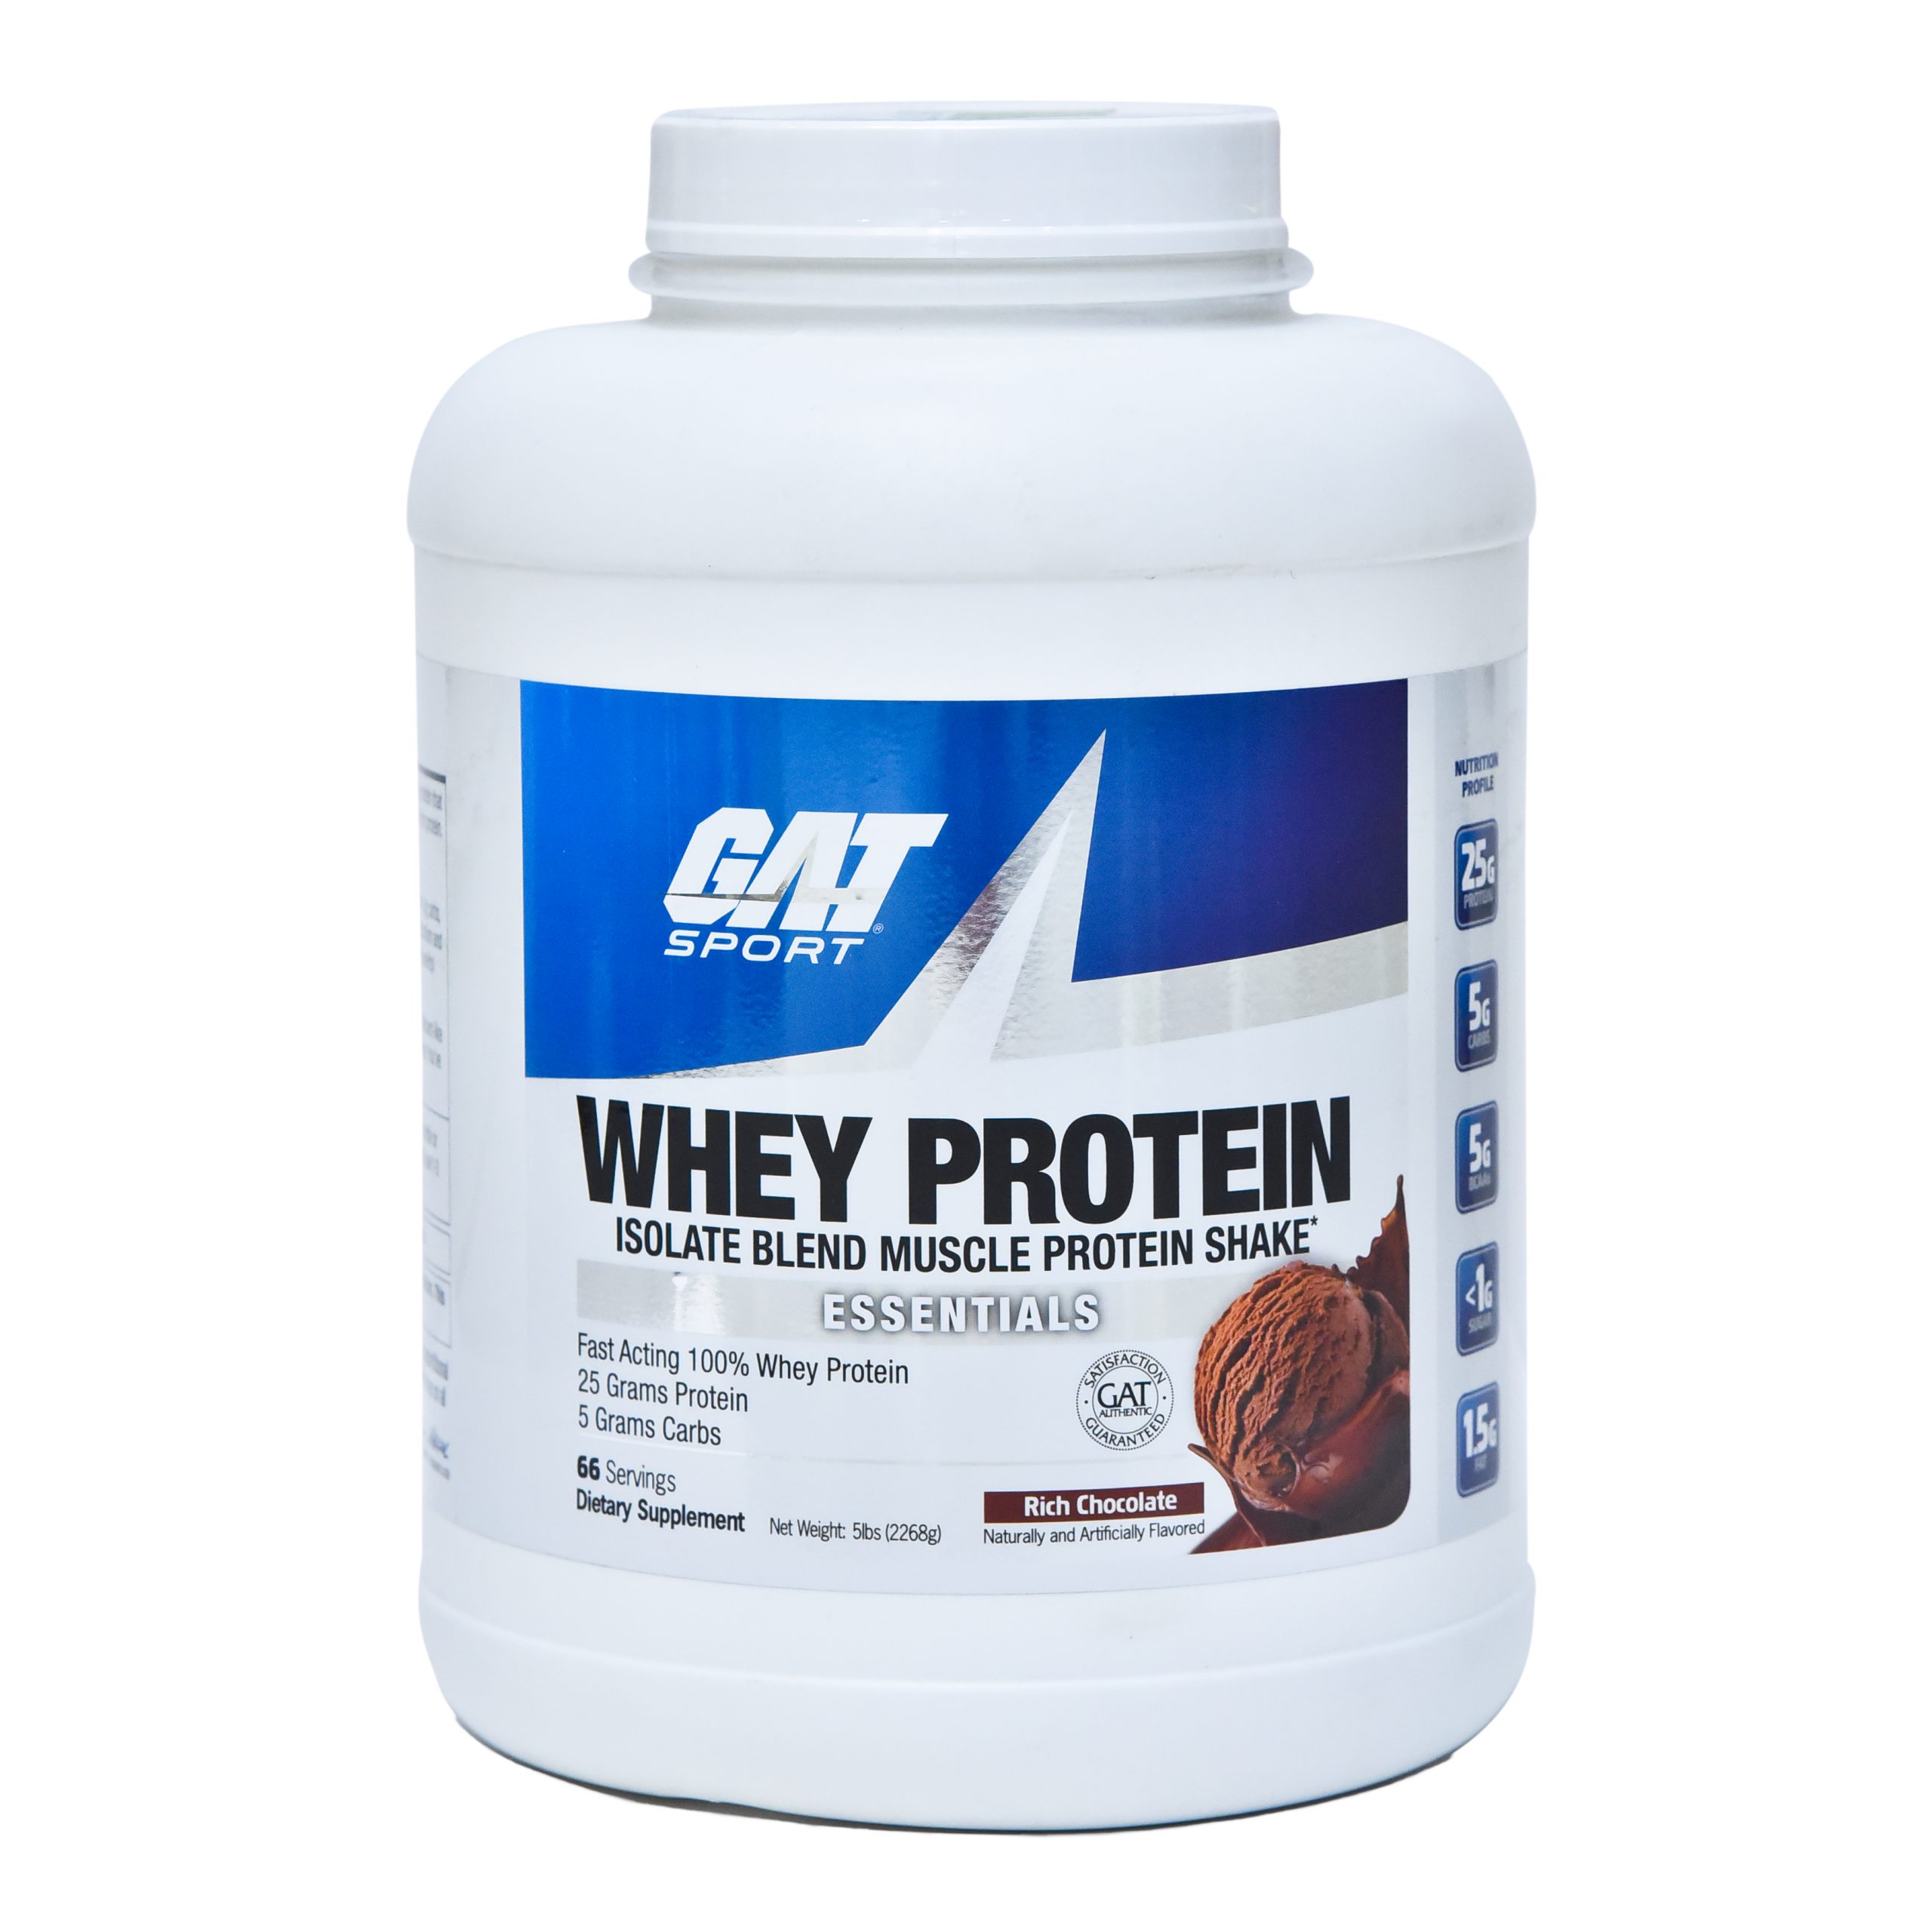 Gat Sports Whey Protein 5lbs - The Protein Gram